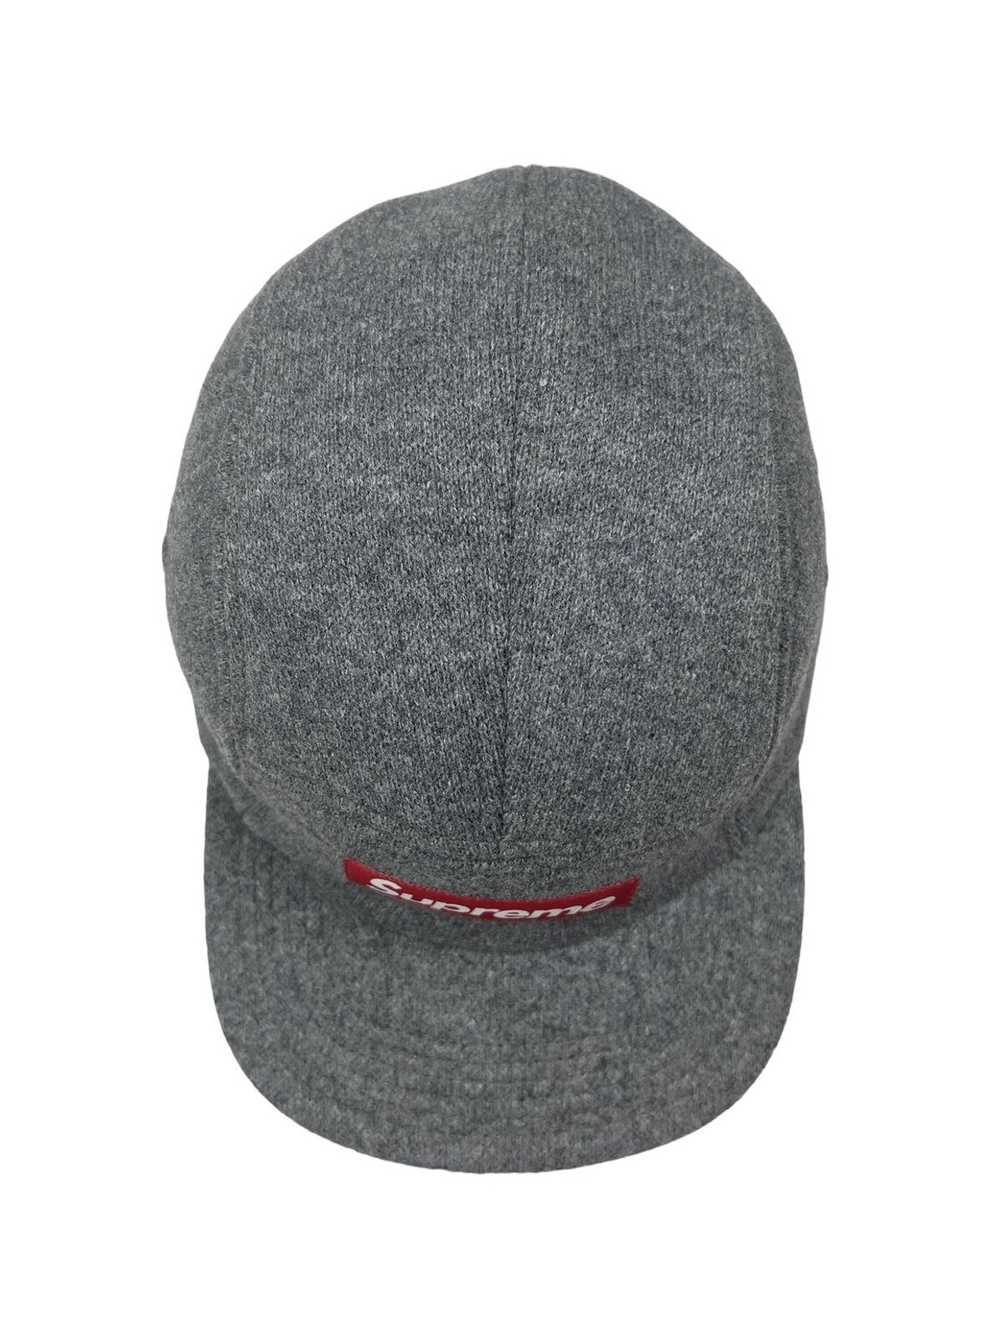 Supreme Supreme Wool Fitted Camp Cap - image 3